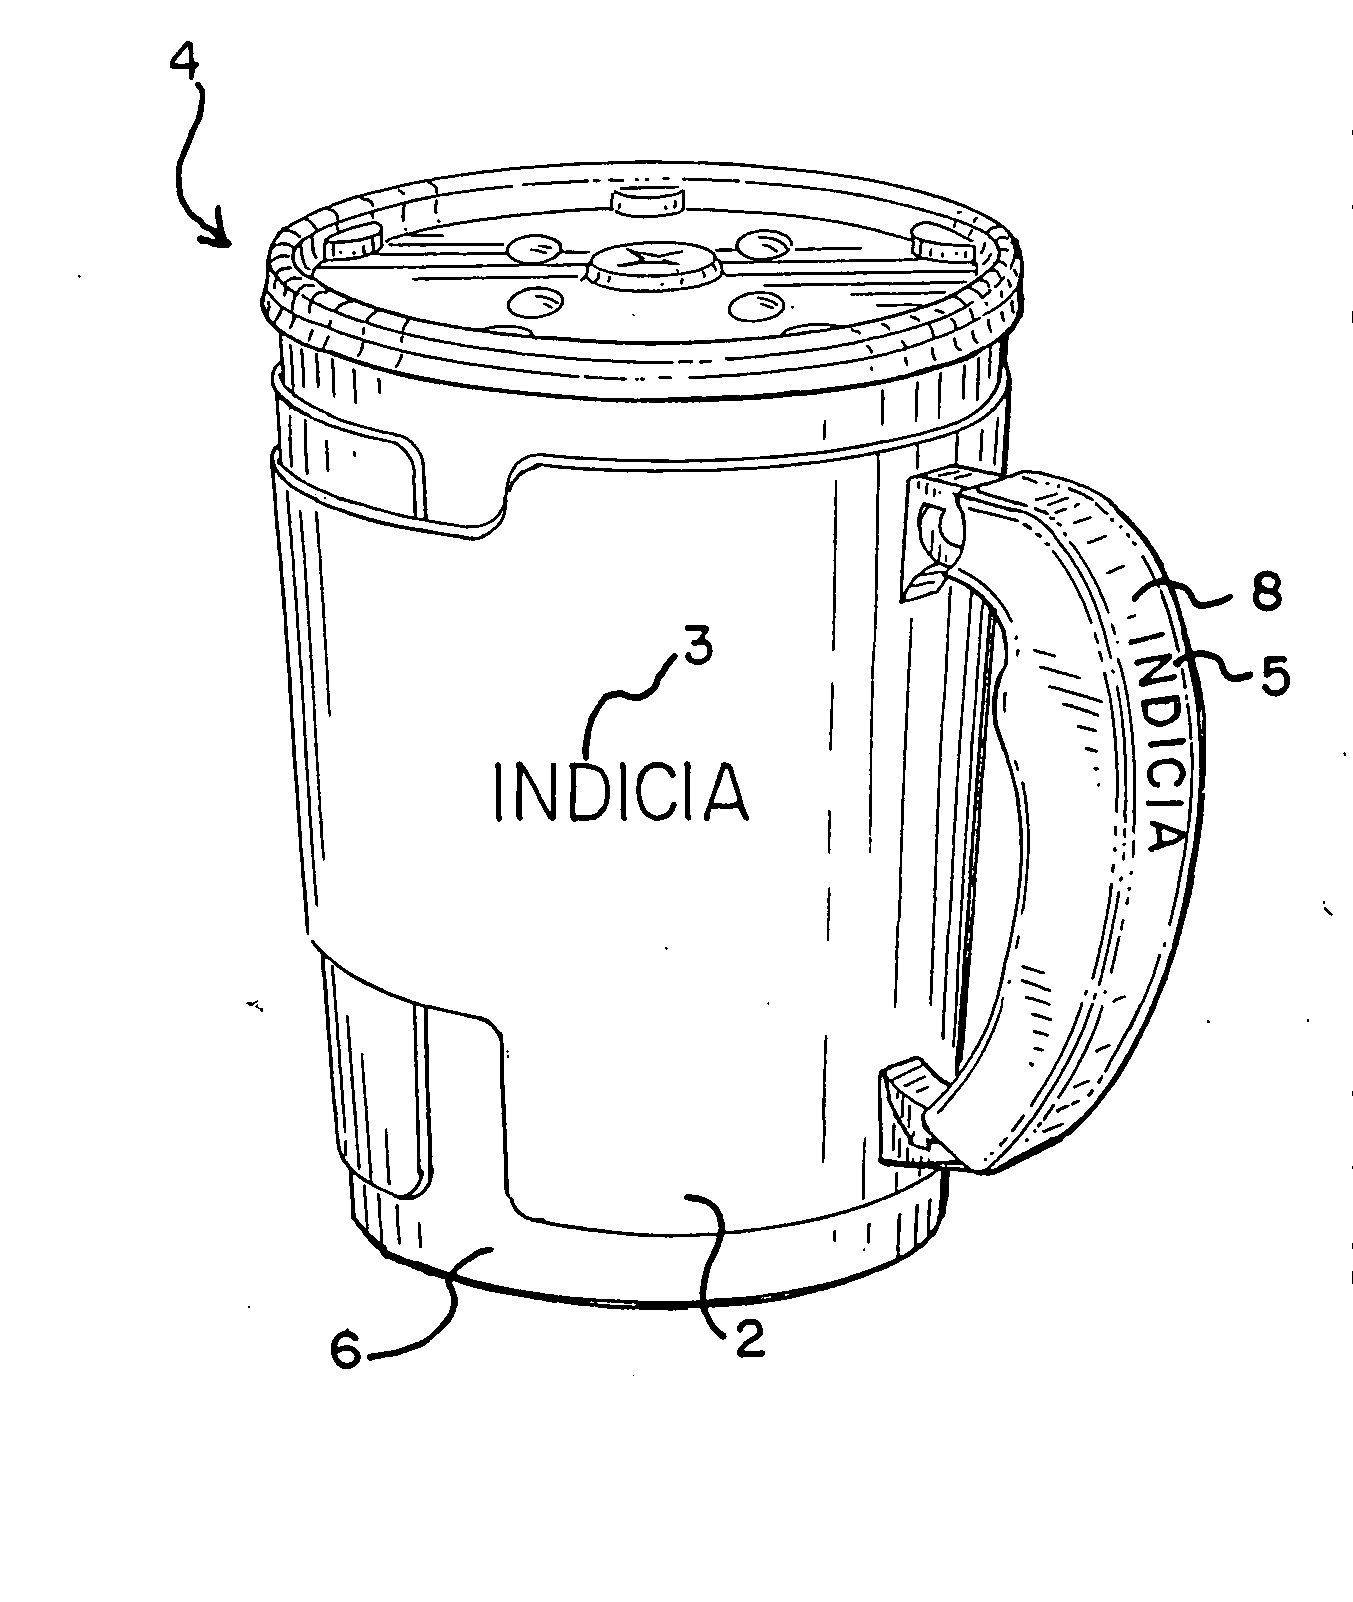 Holder, system and/or method for insulating and/or for supporting a cup